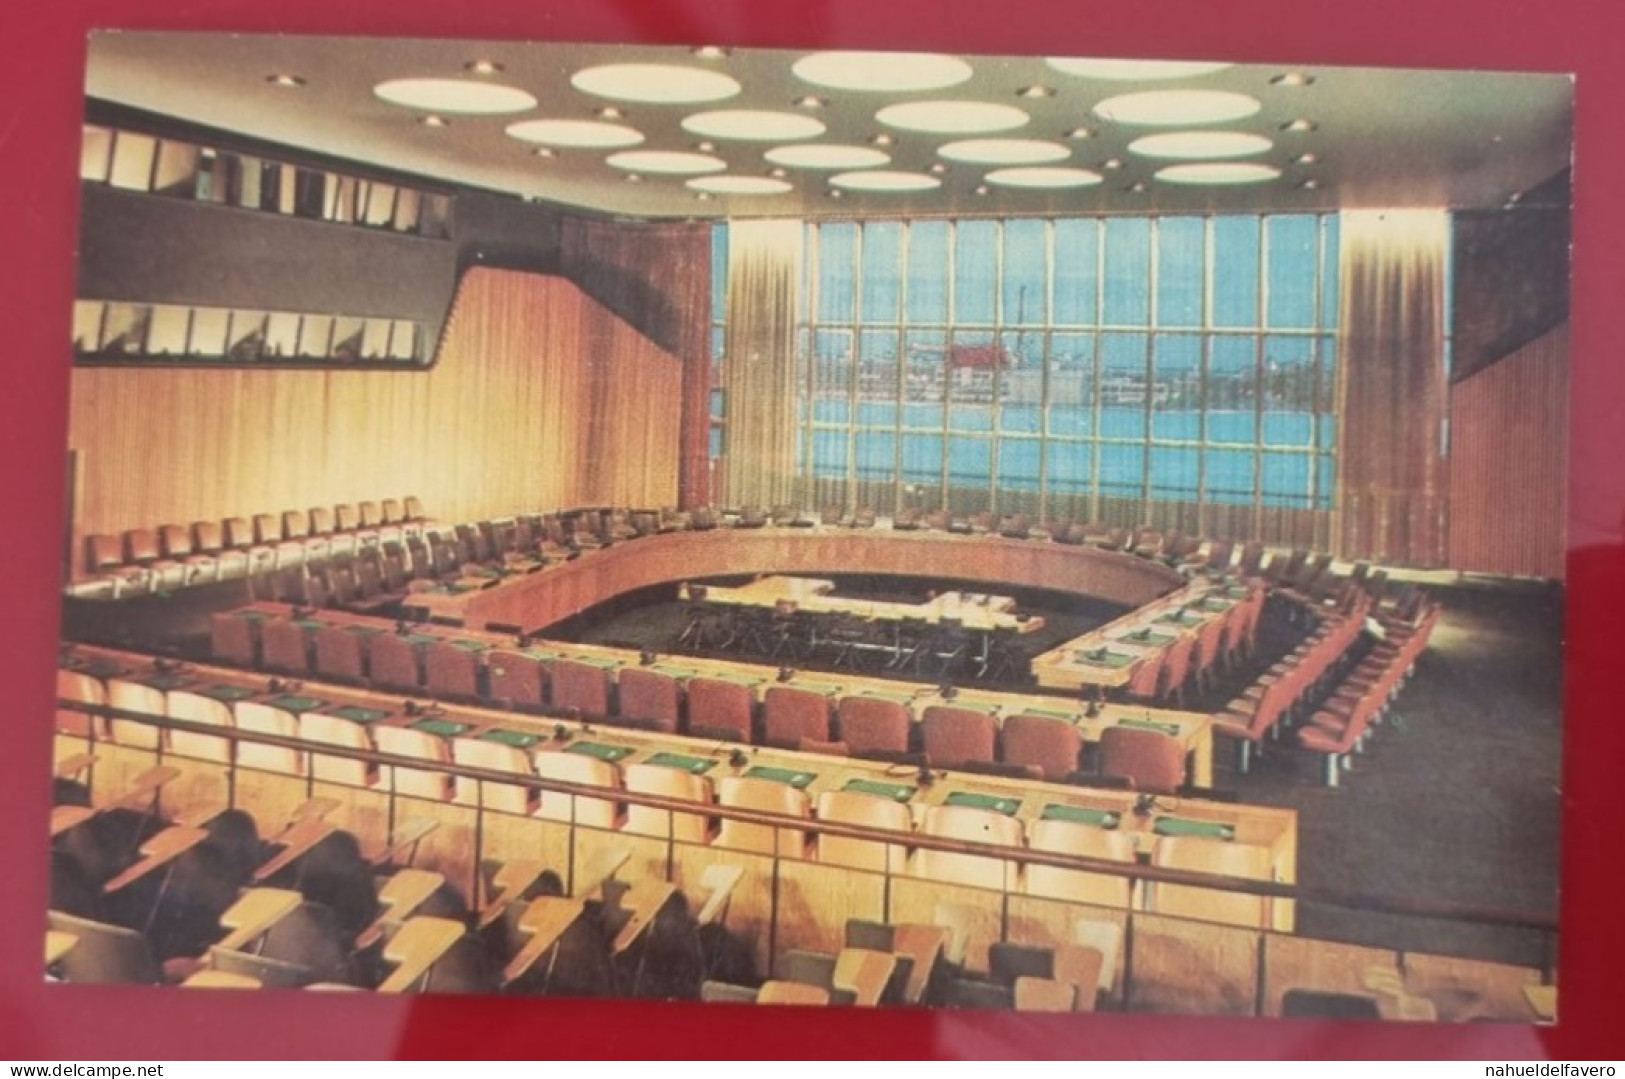 Uncirculated Postcard - USA - NY, NEW YORK CITY - UNITED NATIONS, ECONOMIC AND SOCIAL COUNCIL CHAMBER - Places